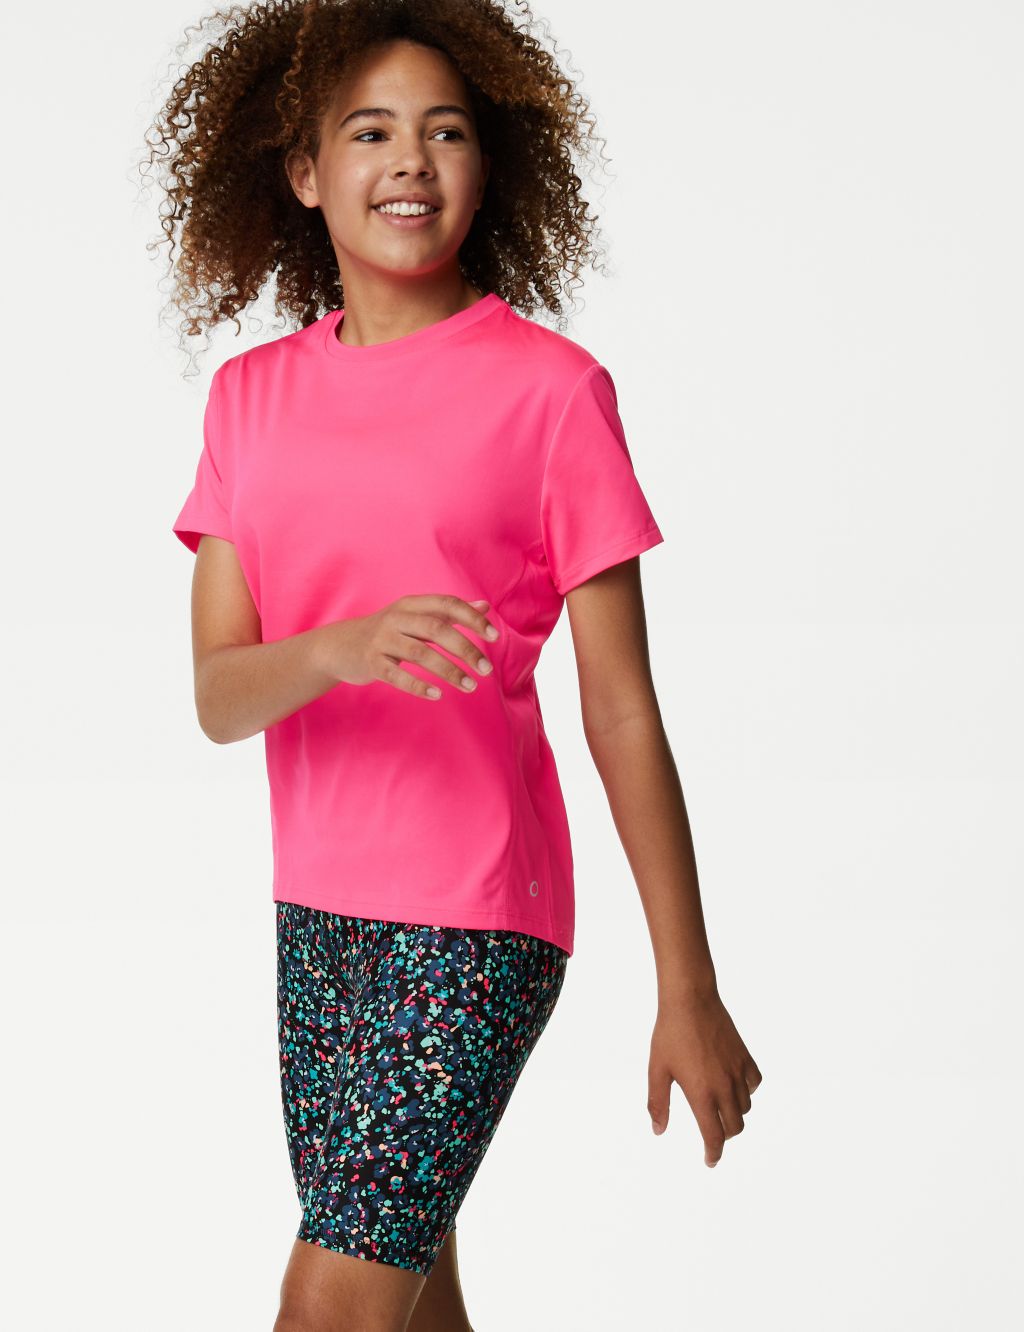 Shop GOODMOVE Girl's Clothing up to 60% Off